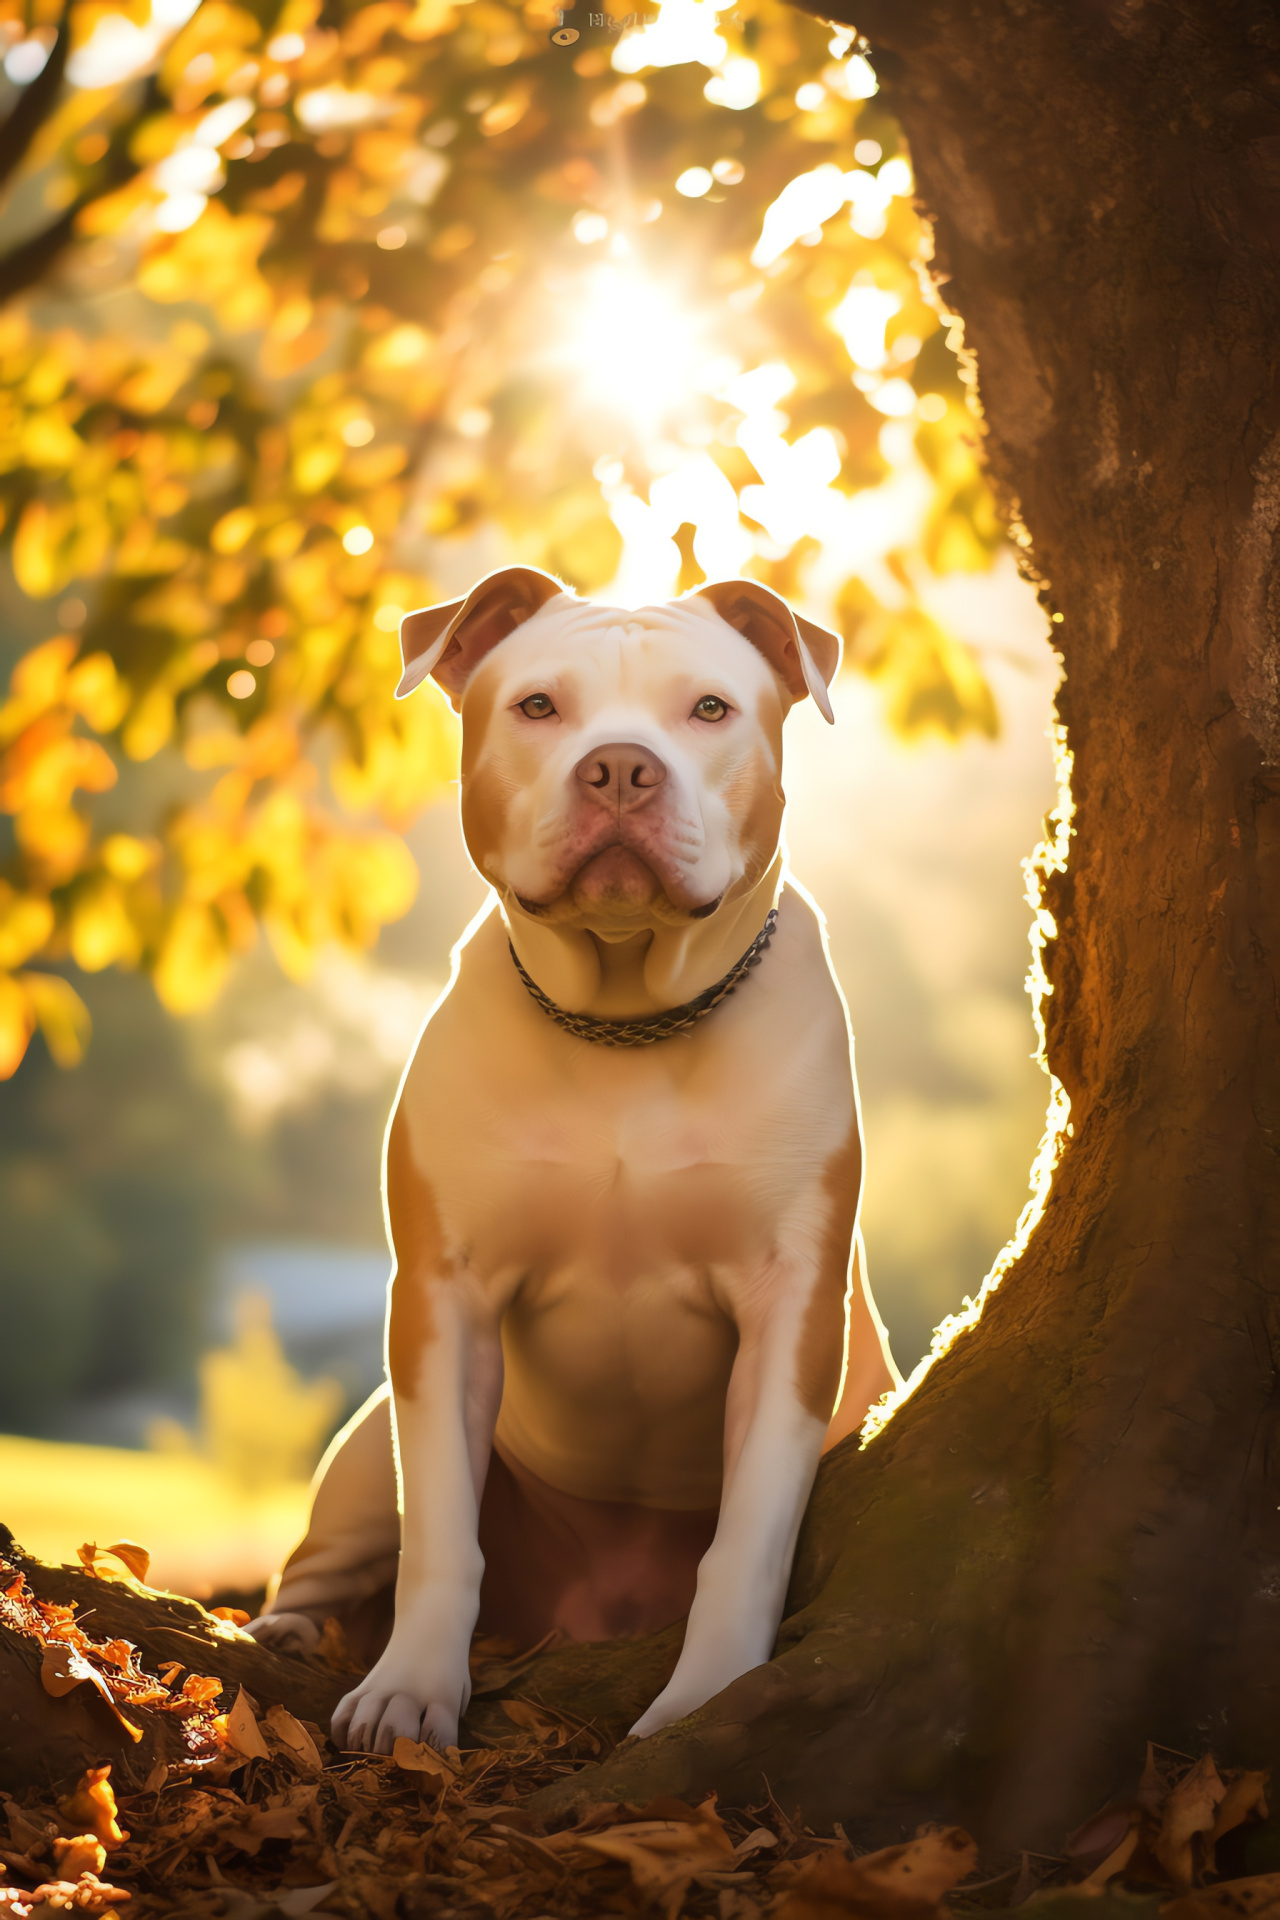 Pitbull dog outdoors, country living, tree-lined rural landscape, domesticated animal, serene canine, HD Phone Wallpaper